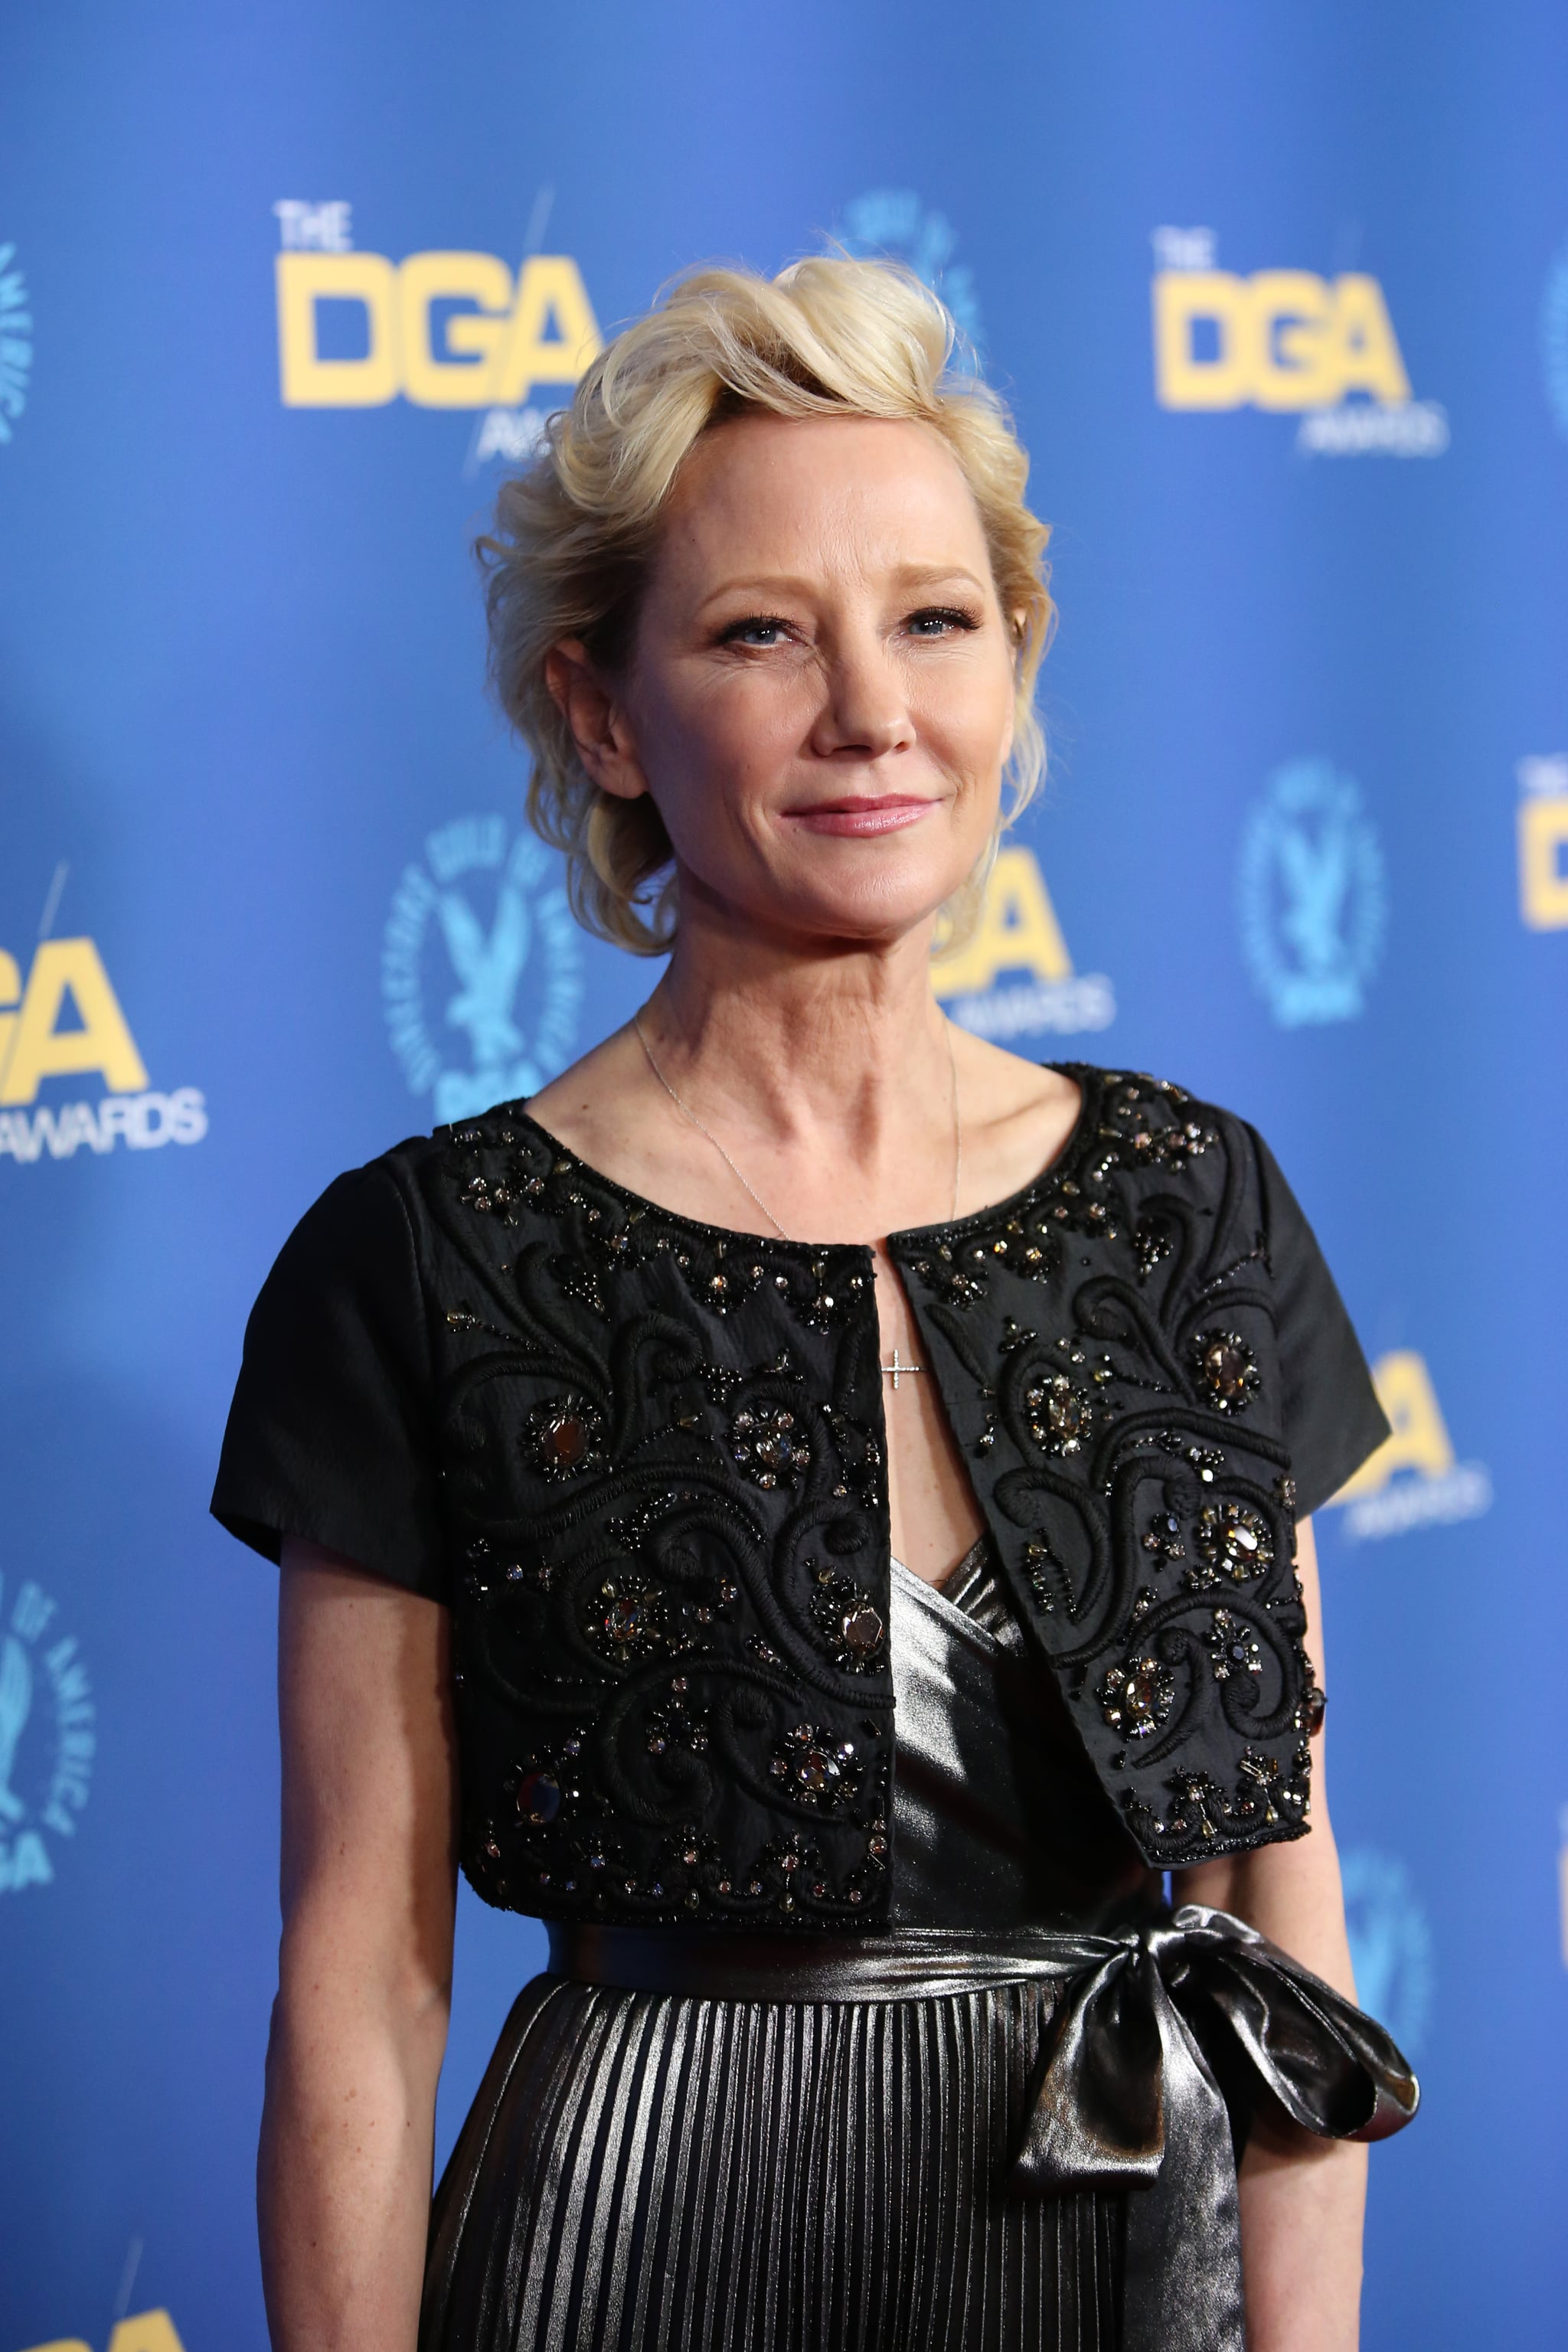 BEVERLY HILLS, CALIFORNIA - MARCH 12: Anne Heche attends the 74th Annual Directors Guild Of America Awards at The Beverly Hilton on March 12, 2022 in Beverly Hills, California. (Photo by Jesse Grant/Getty Images)